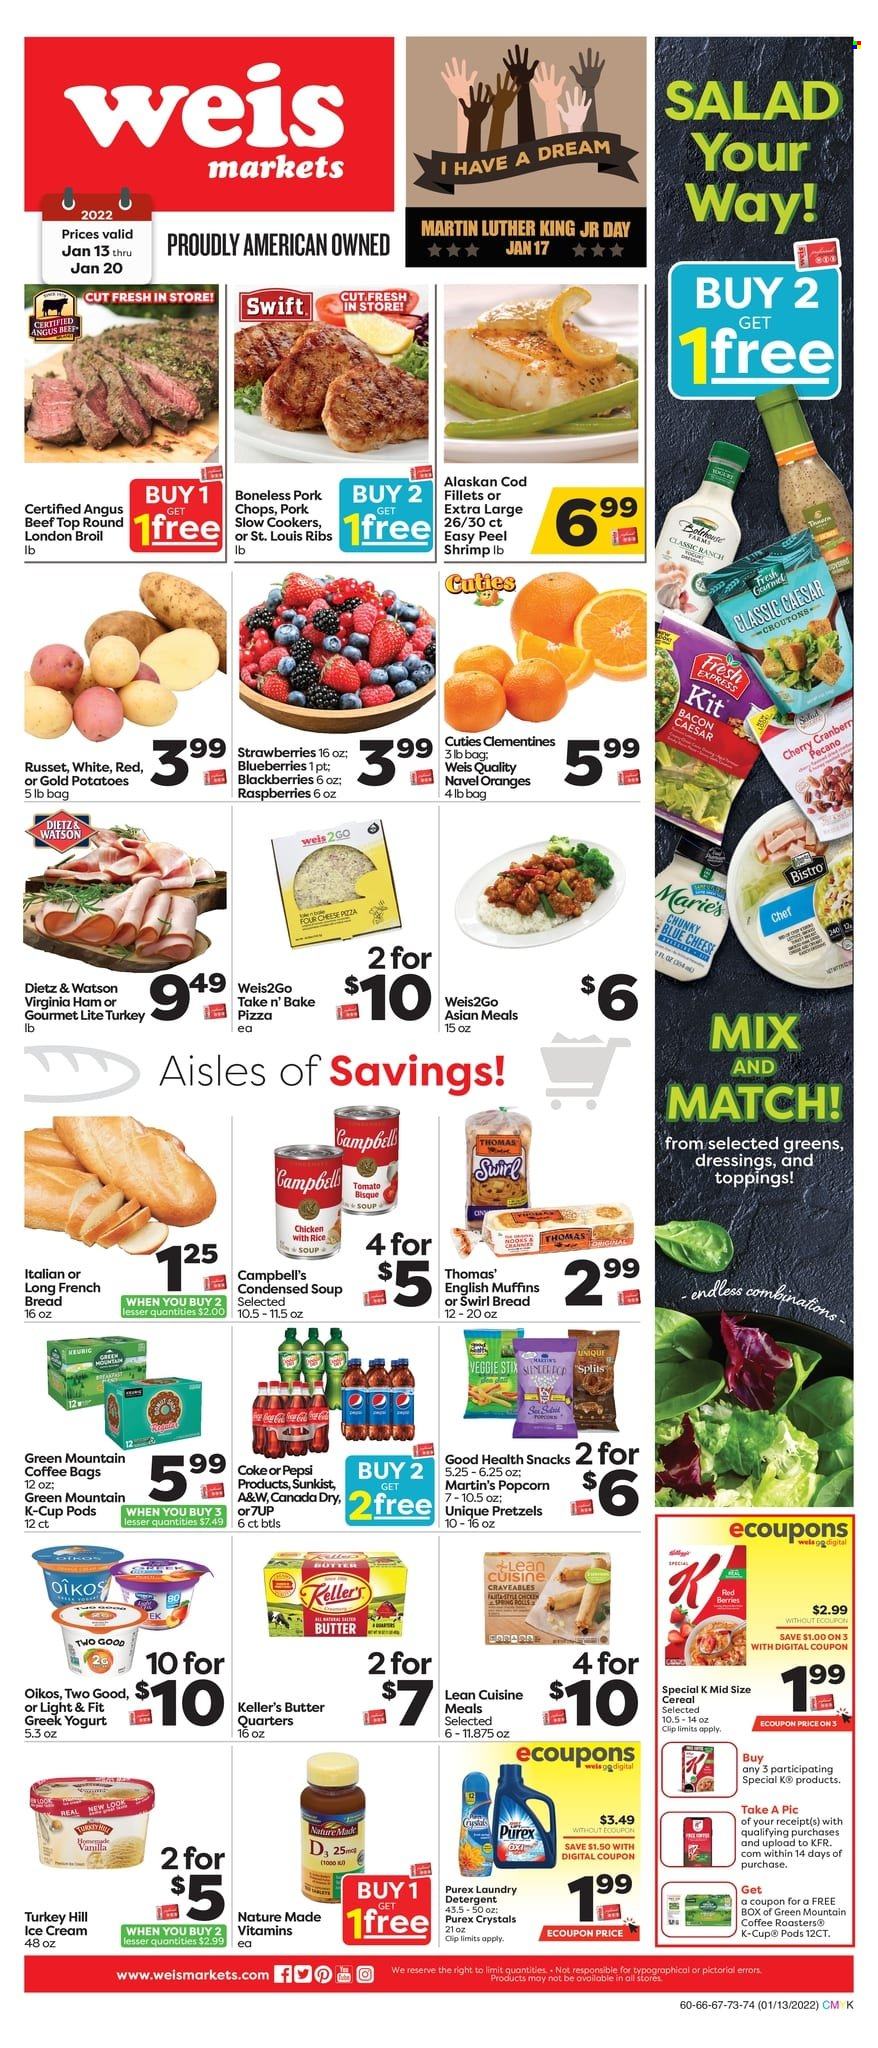 thumbnail - Weis Flyer - 01/13/2022 - 01/20/2022 - Sales products - bread, english muffins, pretzels, french bread, russet potatoes, potatoes, blackberries, blueberries, strawberries, cherries, oranges, beef meat, pork chops, pork meat, cod, shrimps, Campbell's, pizza, condensed soup, soup, instant soup, Lean Cuisine, ham, virginia ham, Dietz & Watson, greek yoghurt, yoghurt, Oikos, butter, ice cream, snack, popcorn, croutons, cereals, Canada Dry, Coca-Cola, Pepsi, A&W, coffee, coffee capsules, K-Cups, Green Mountain, detergent, laundry detergent, Purex, Nature Made, clementines, navel oranges. Page 1.